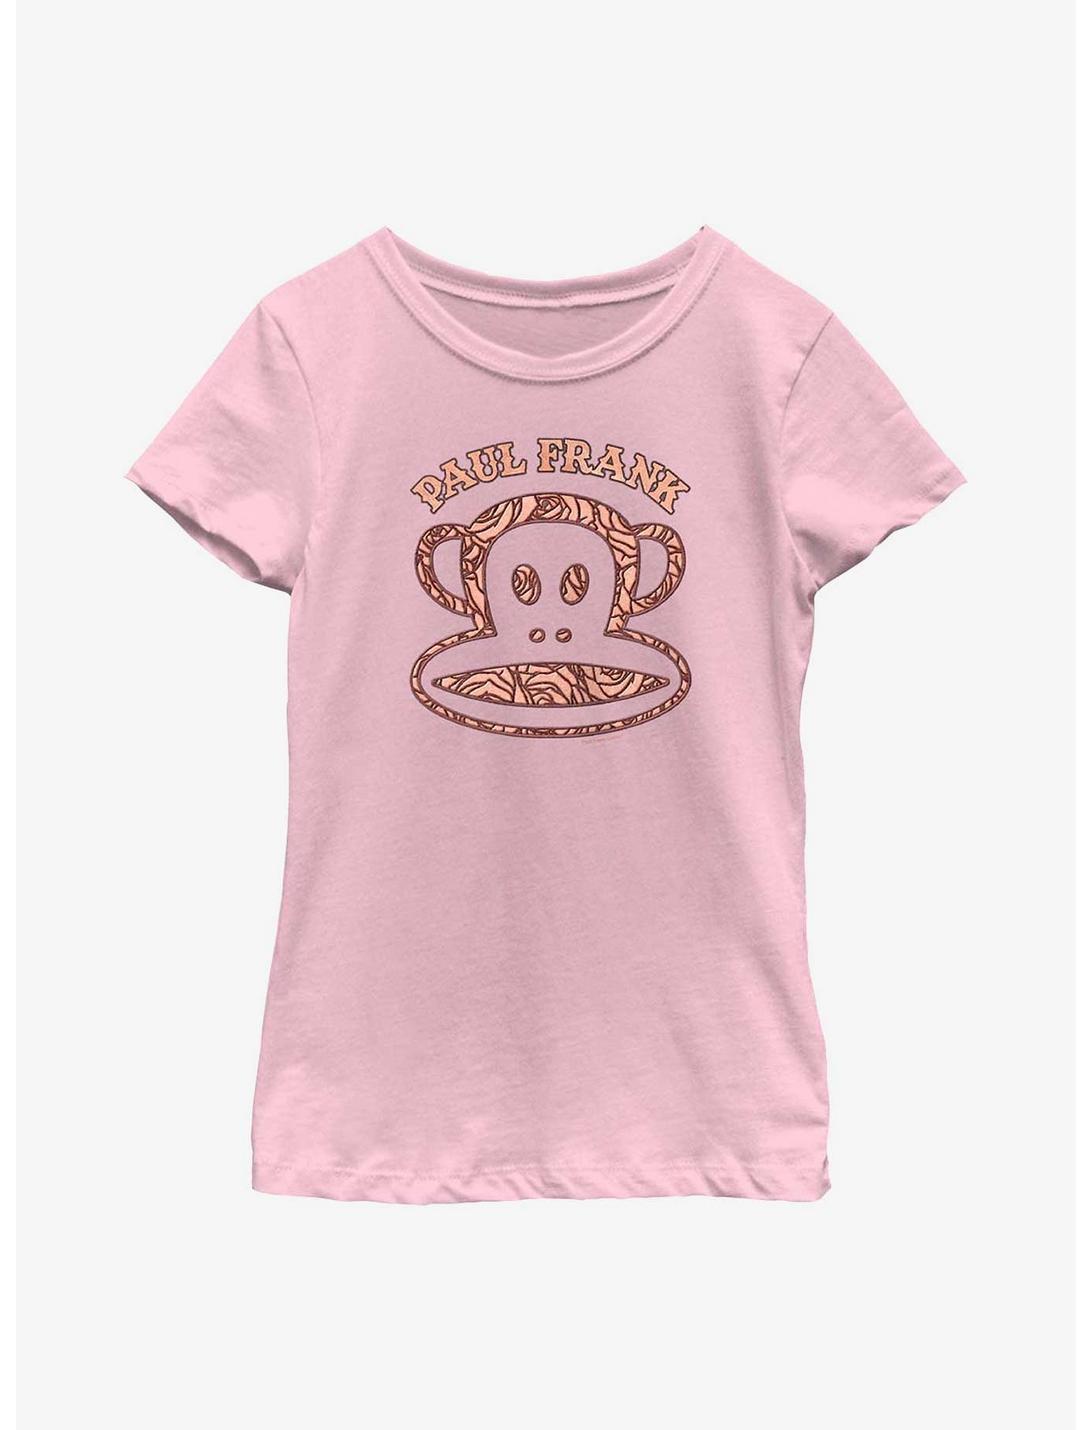 Paul Frank Monkey Face Icon Youth Girls T-Shirt, PINK, hi-res